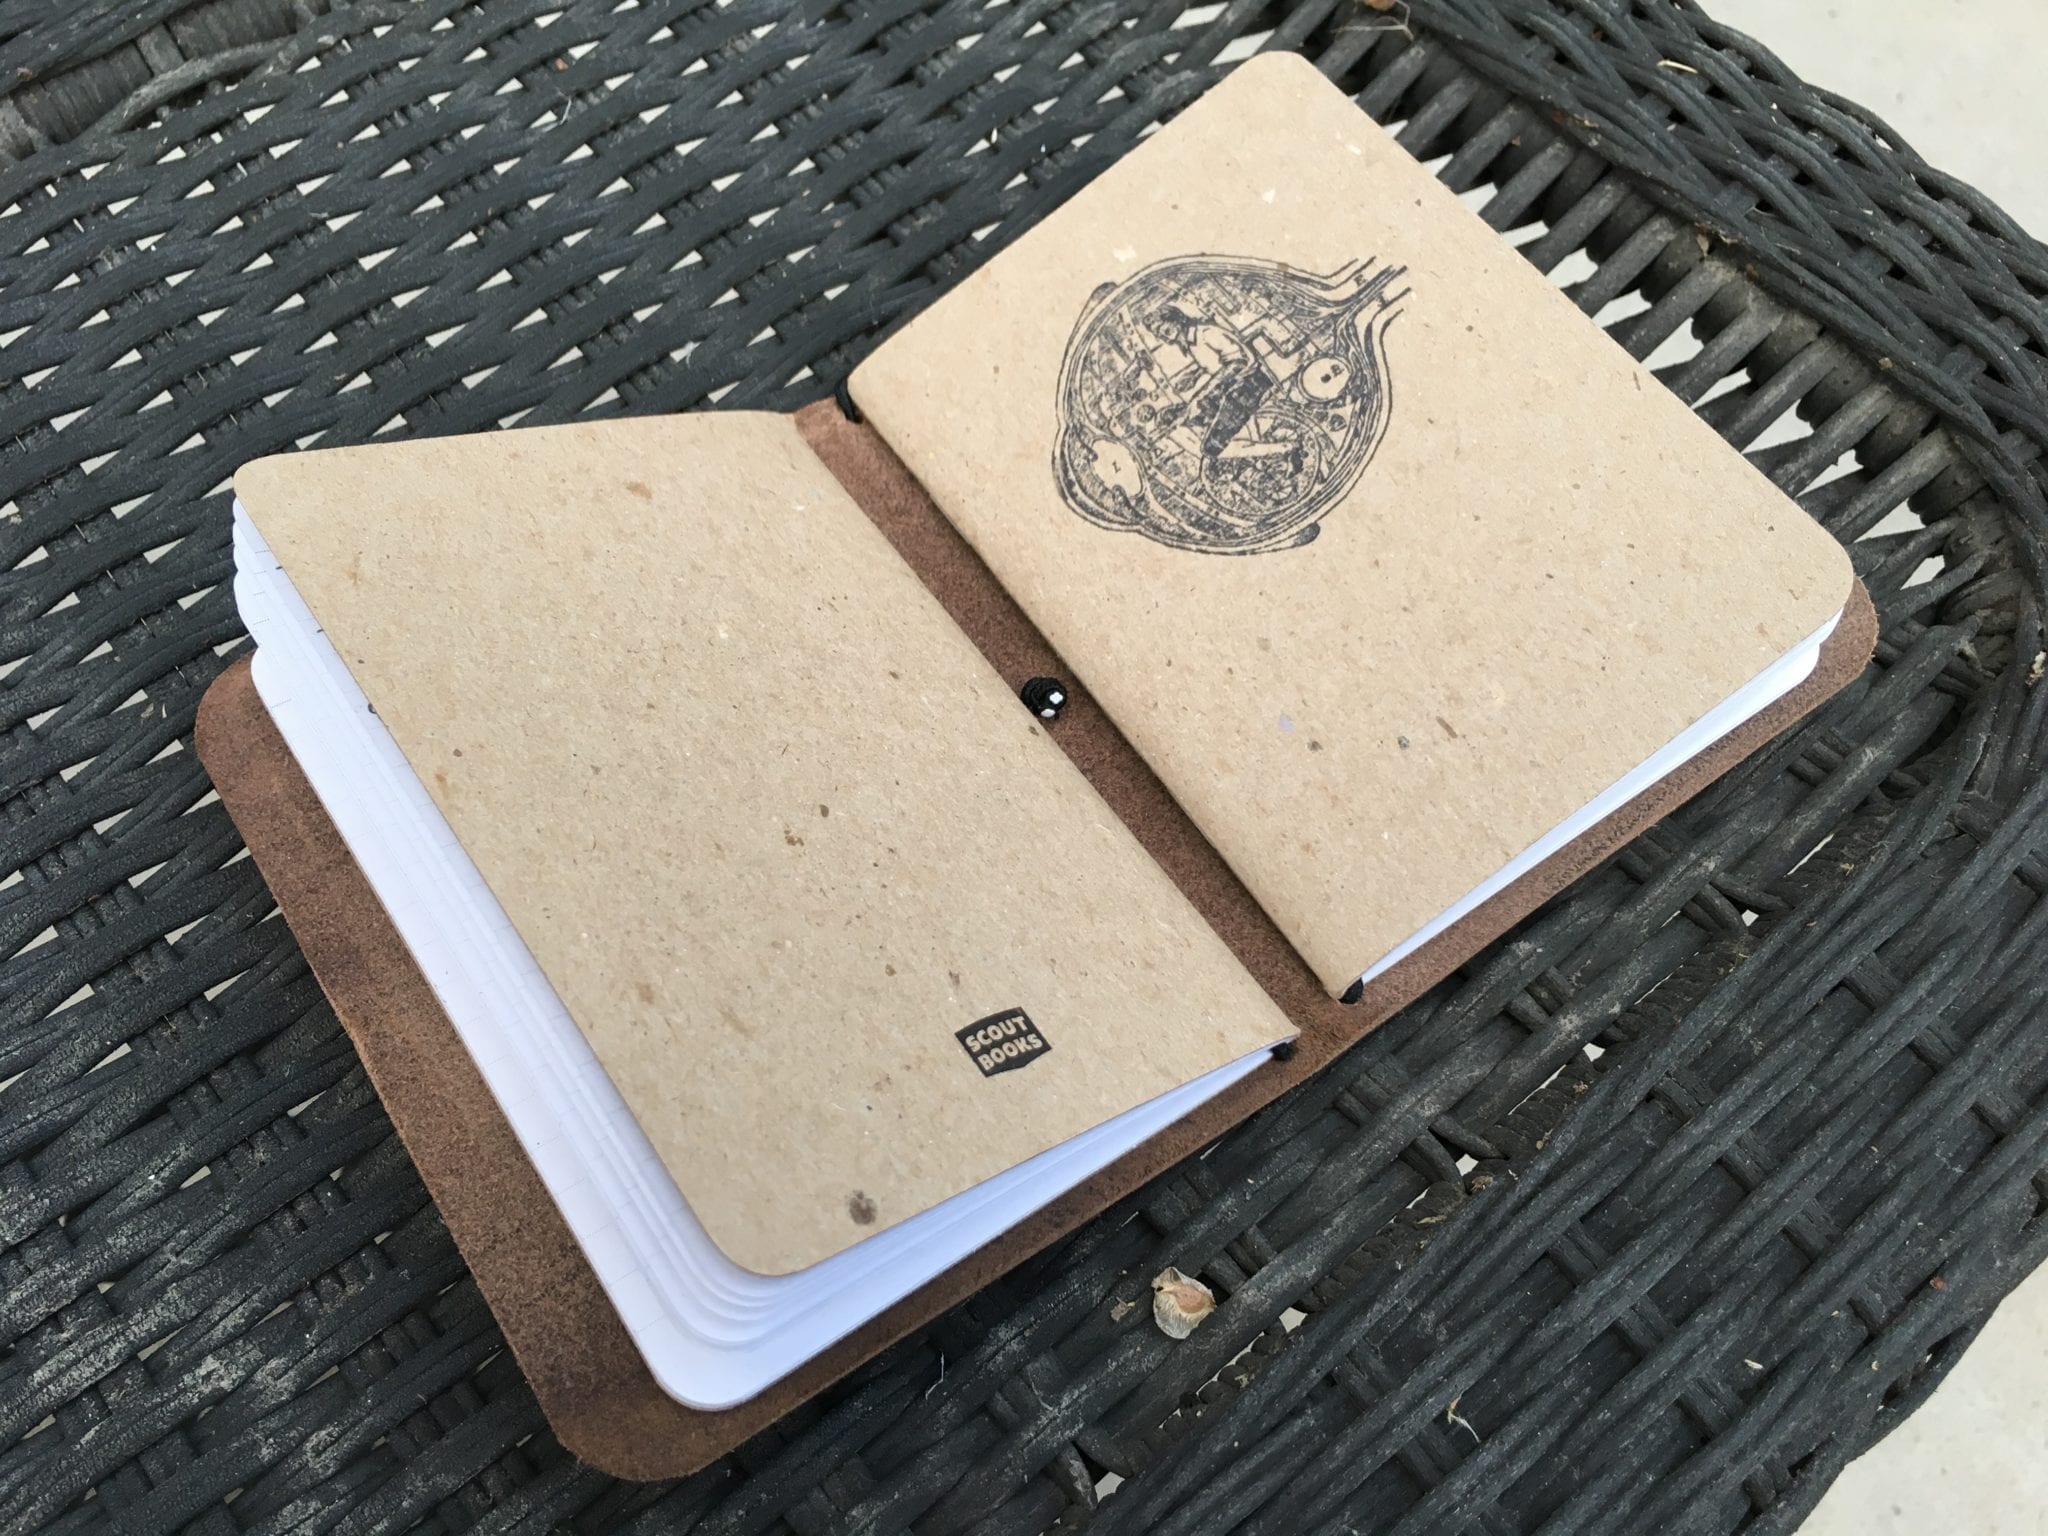 e3-supply-co-passport-notebook-tactical-keychains-review-4